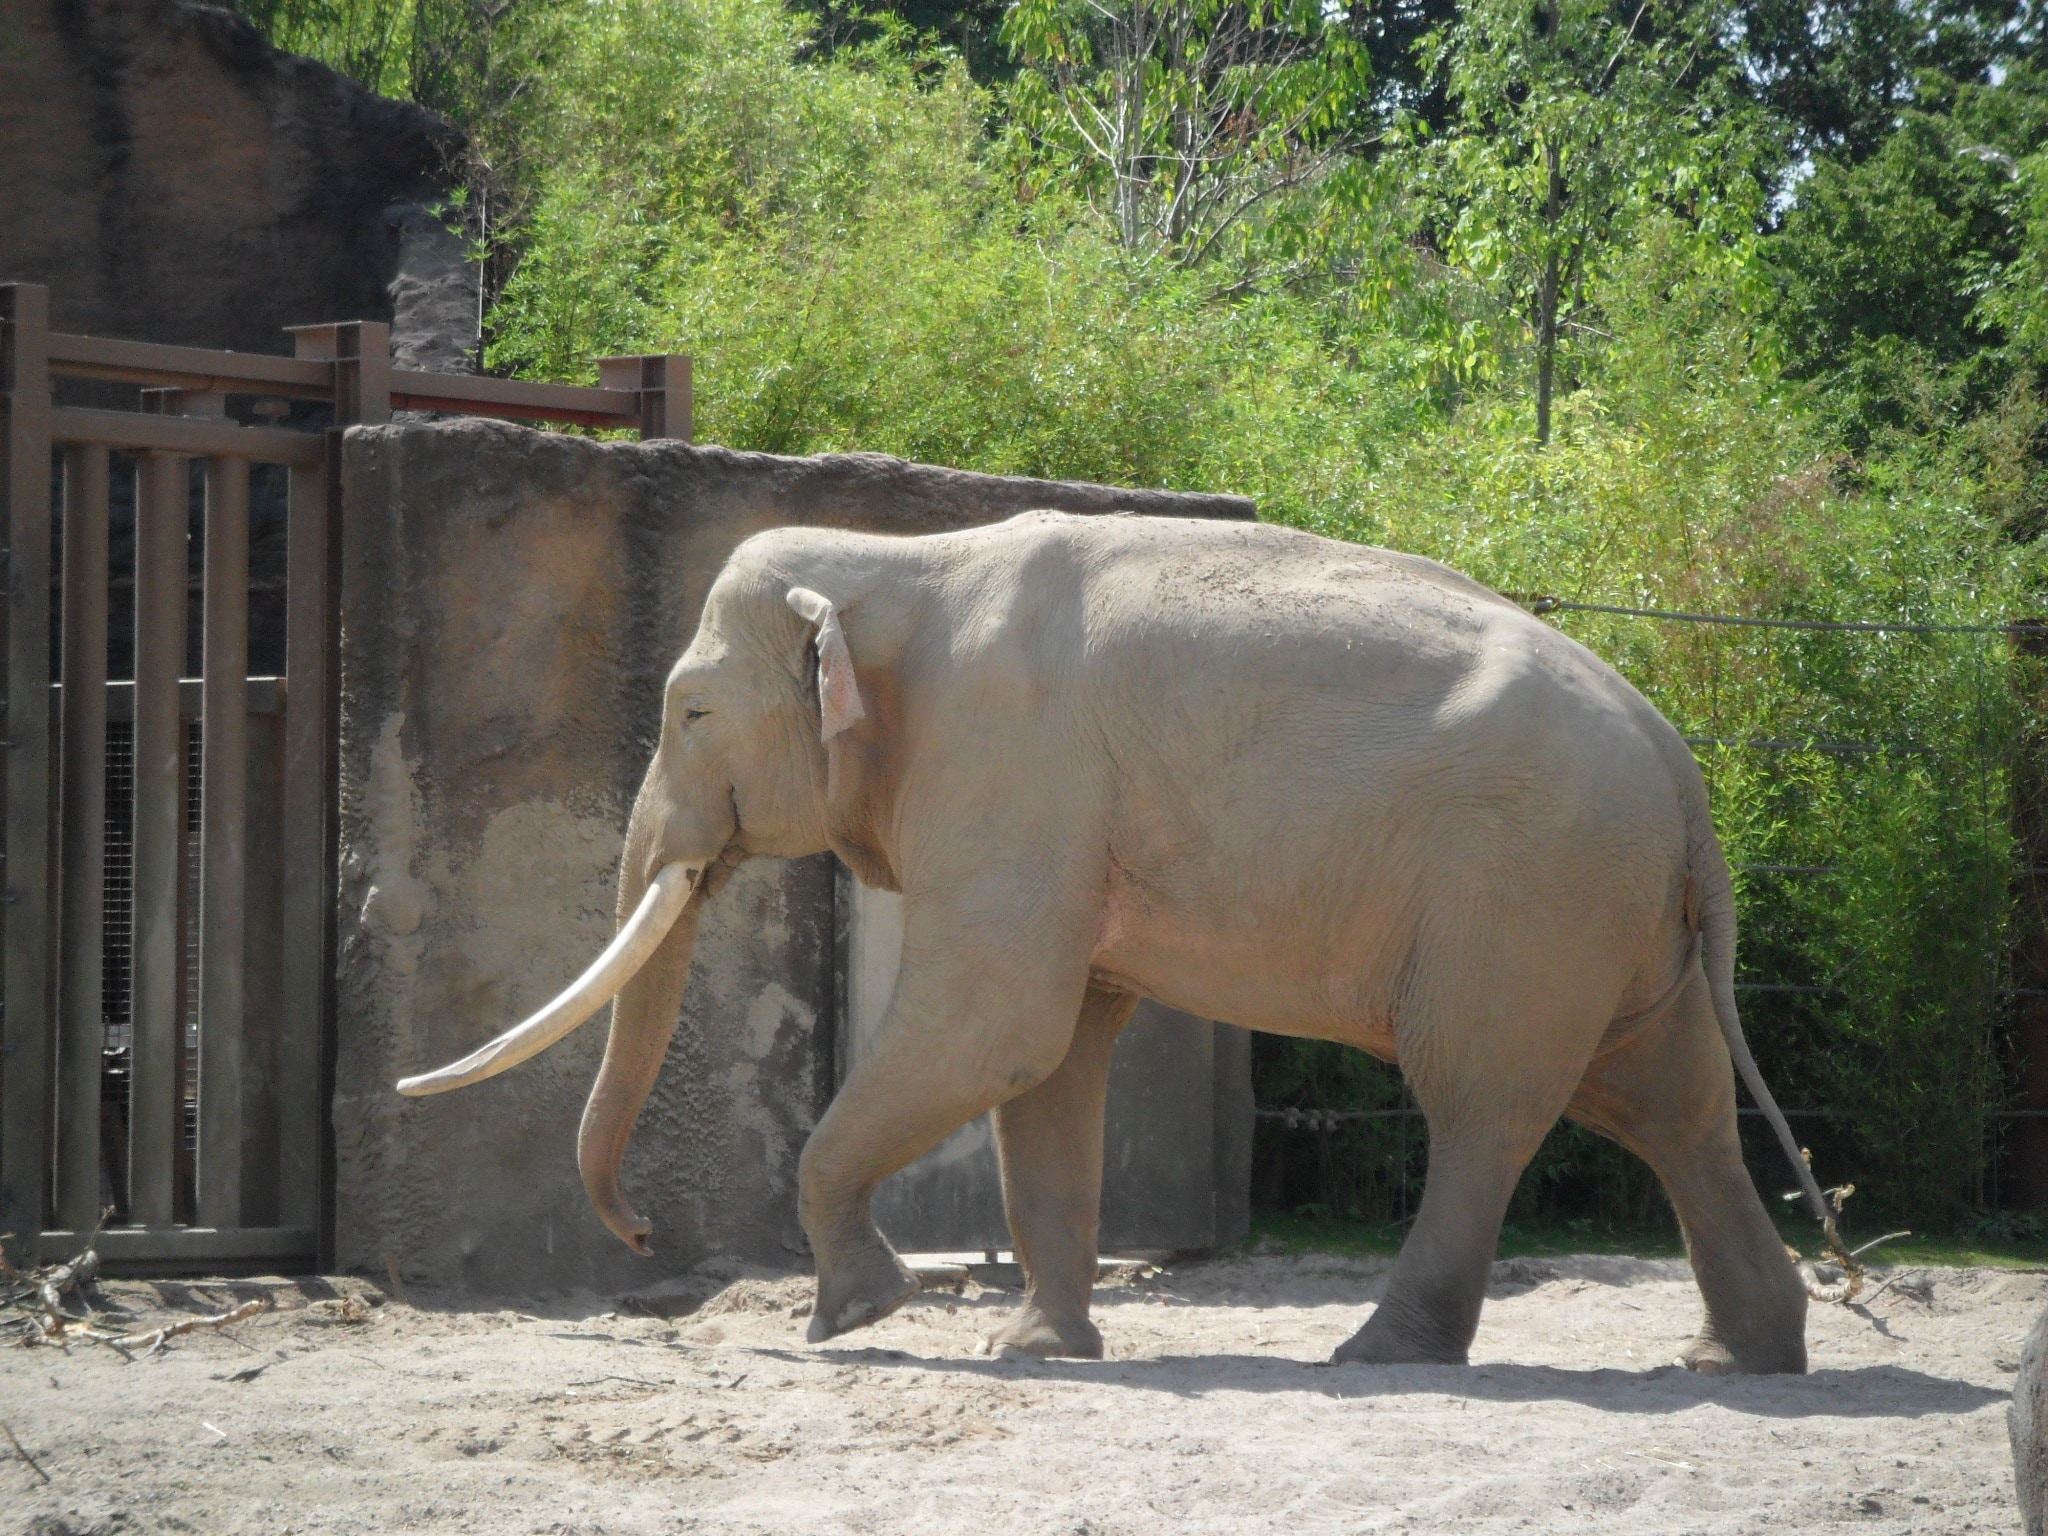 gray elephant walking on gray sand during daytime